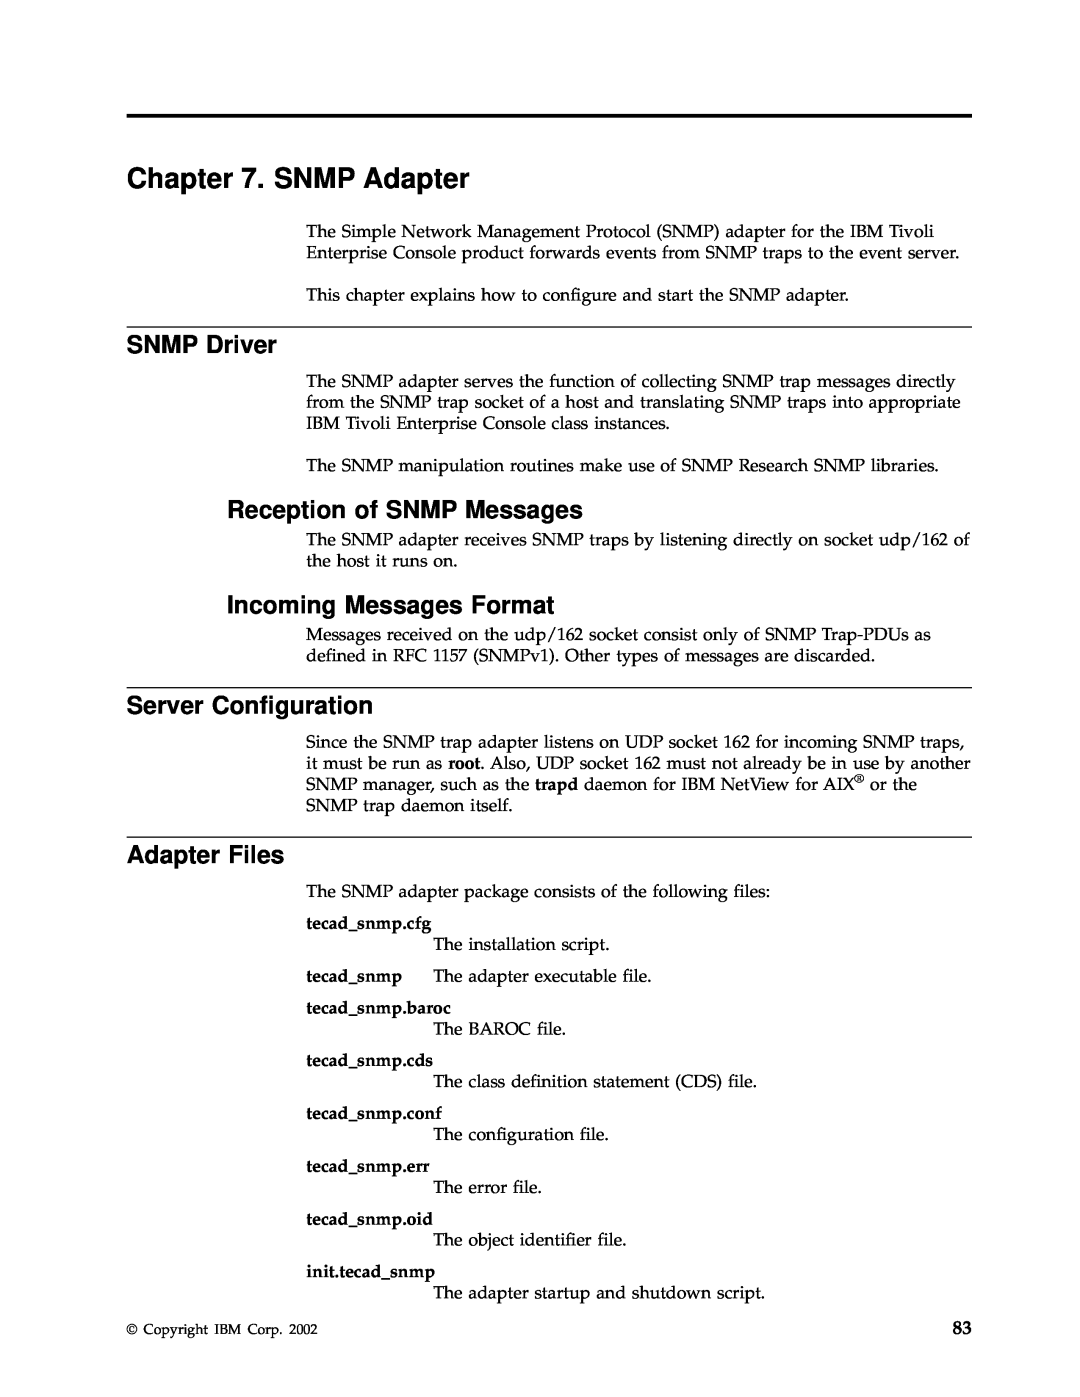 IBM Enterprise Console manual SNMP Adapter, SNMP Driver, Reception of SNMP Messages, Server Configuration, Adapter Files 